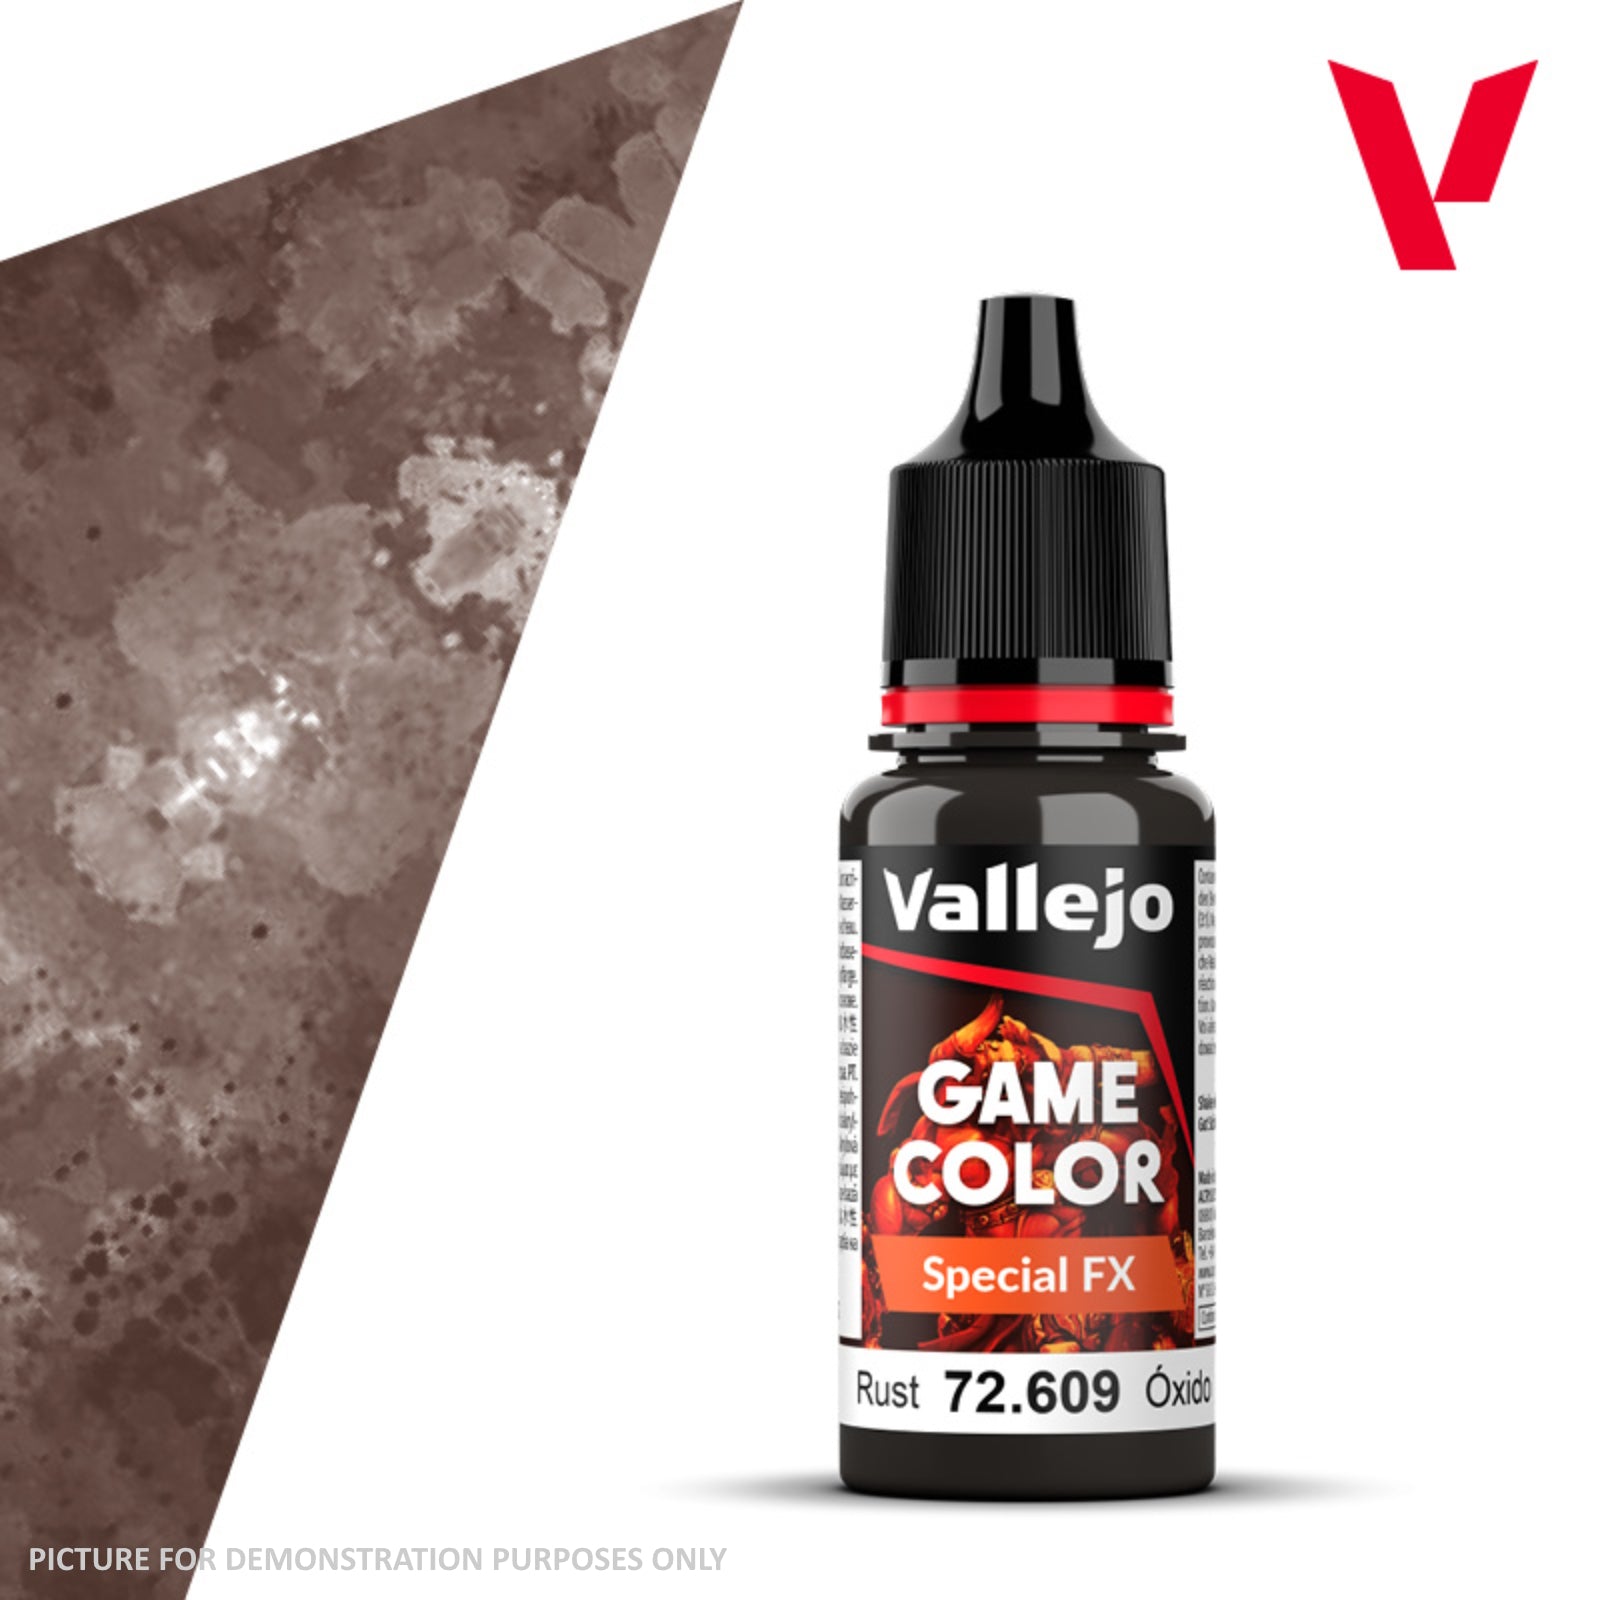 Vallejo Game Colour Special FX - 72.609 Rust 18ml